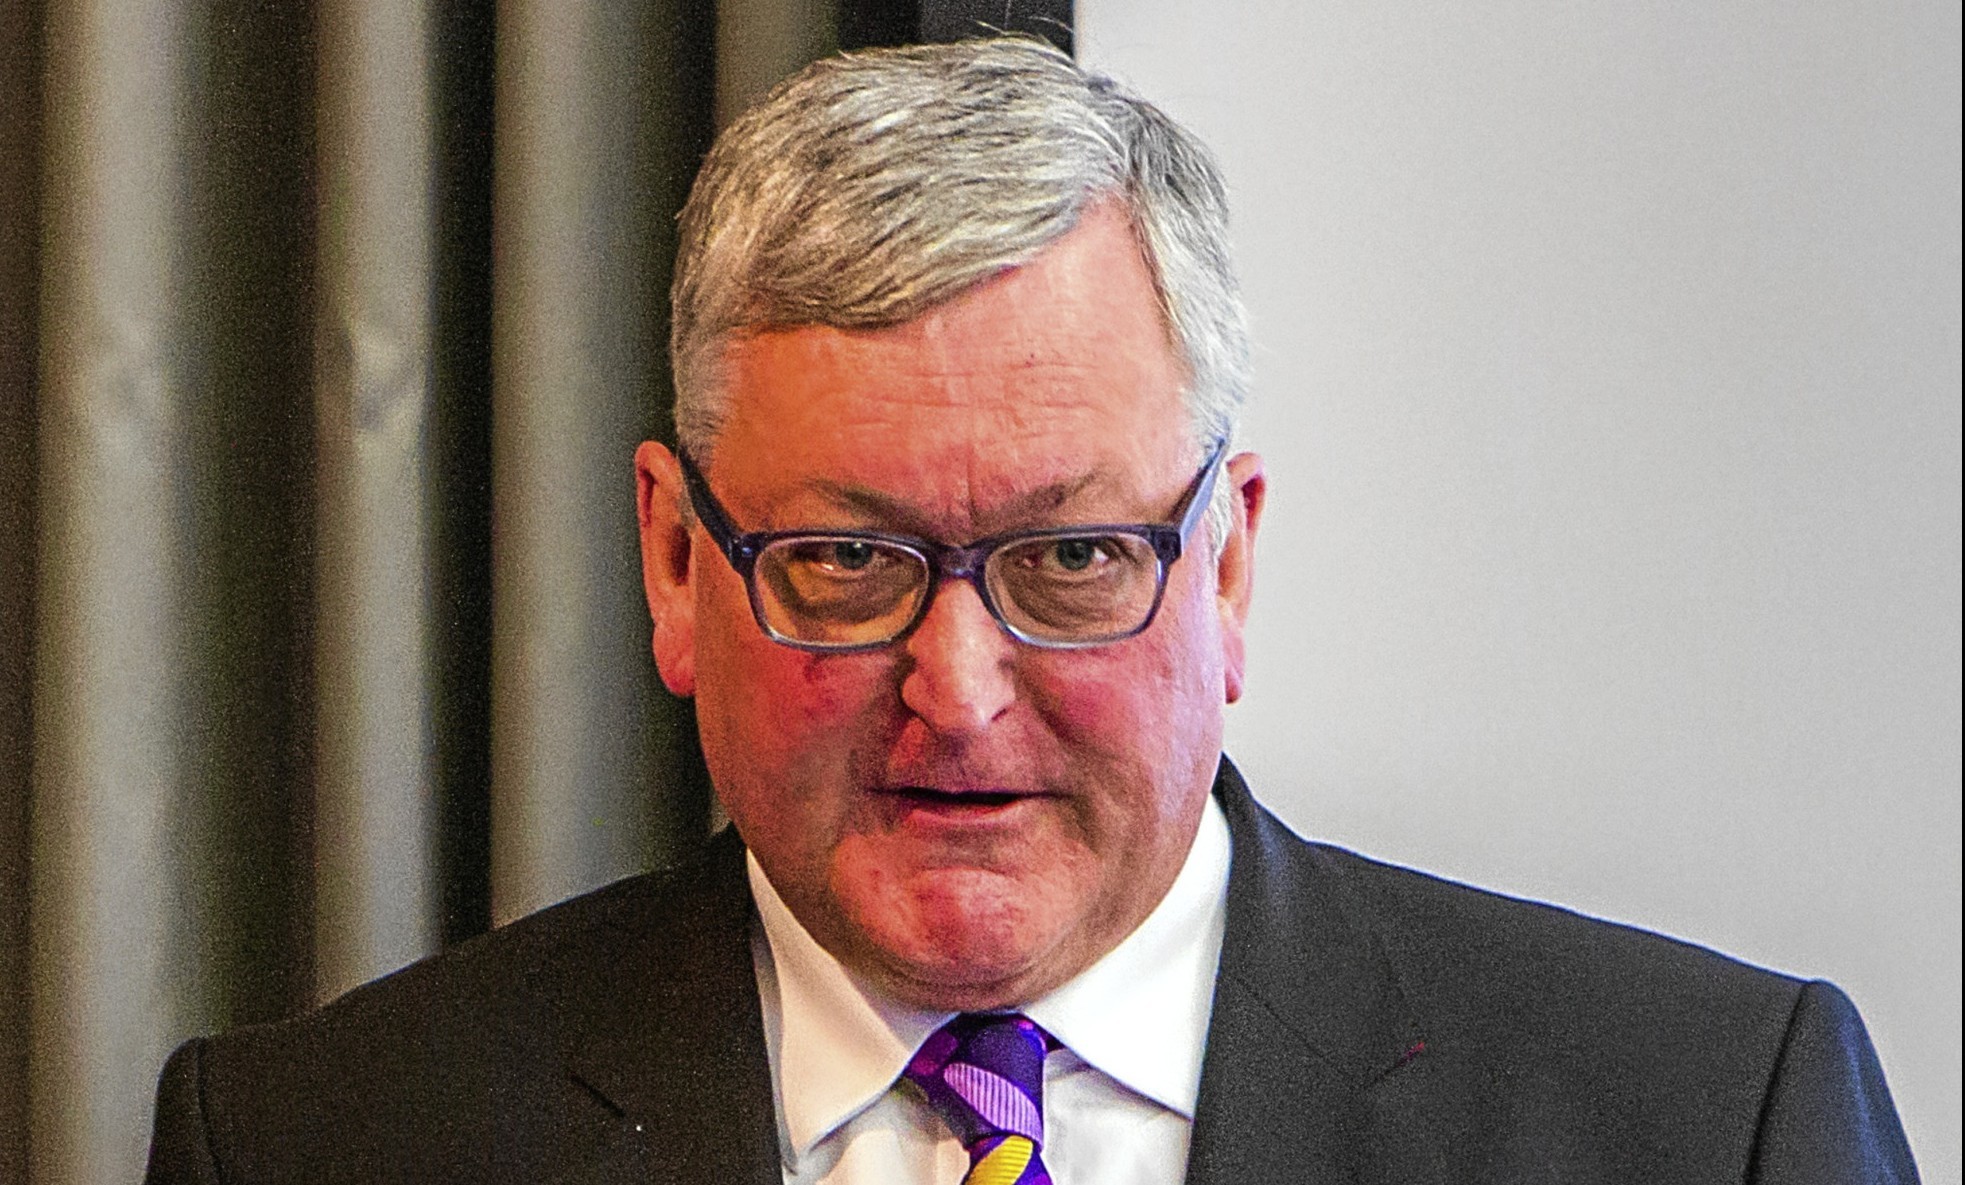 Fergus Ewing said the system is "tremendously complex"